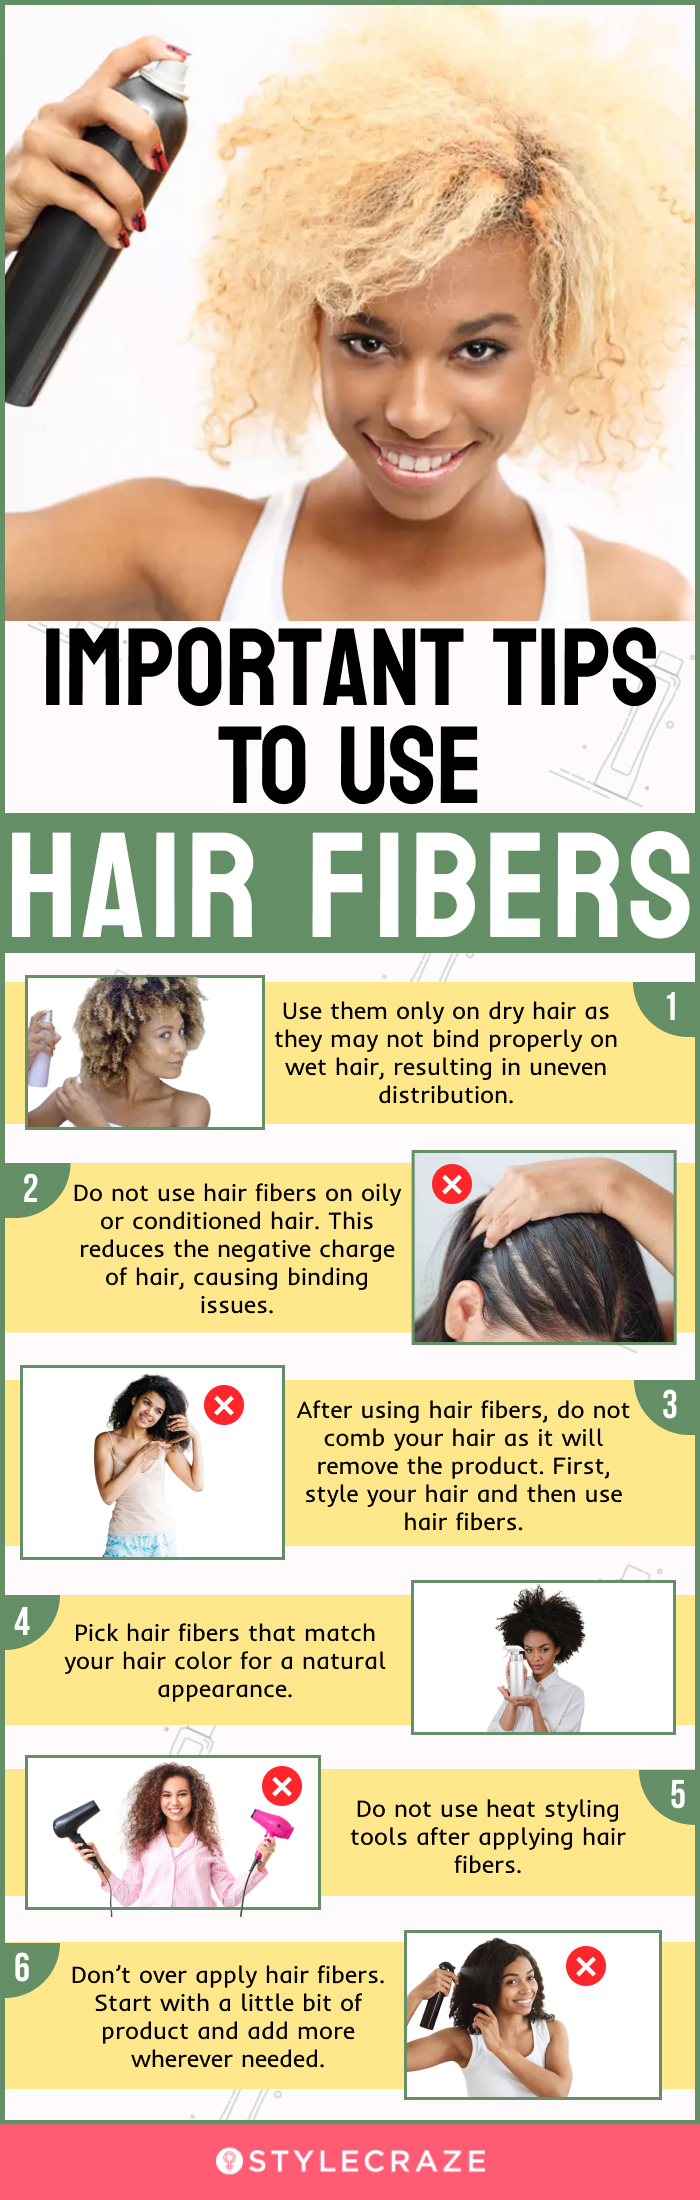 important tips to use hair fibers (infographic)